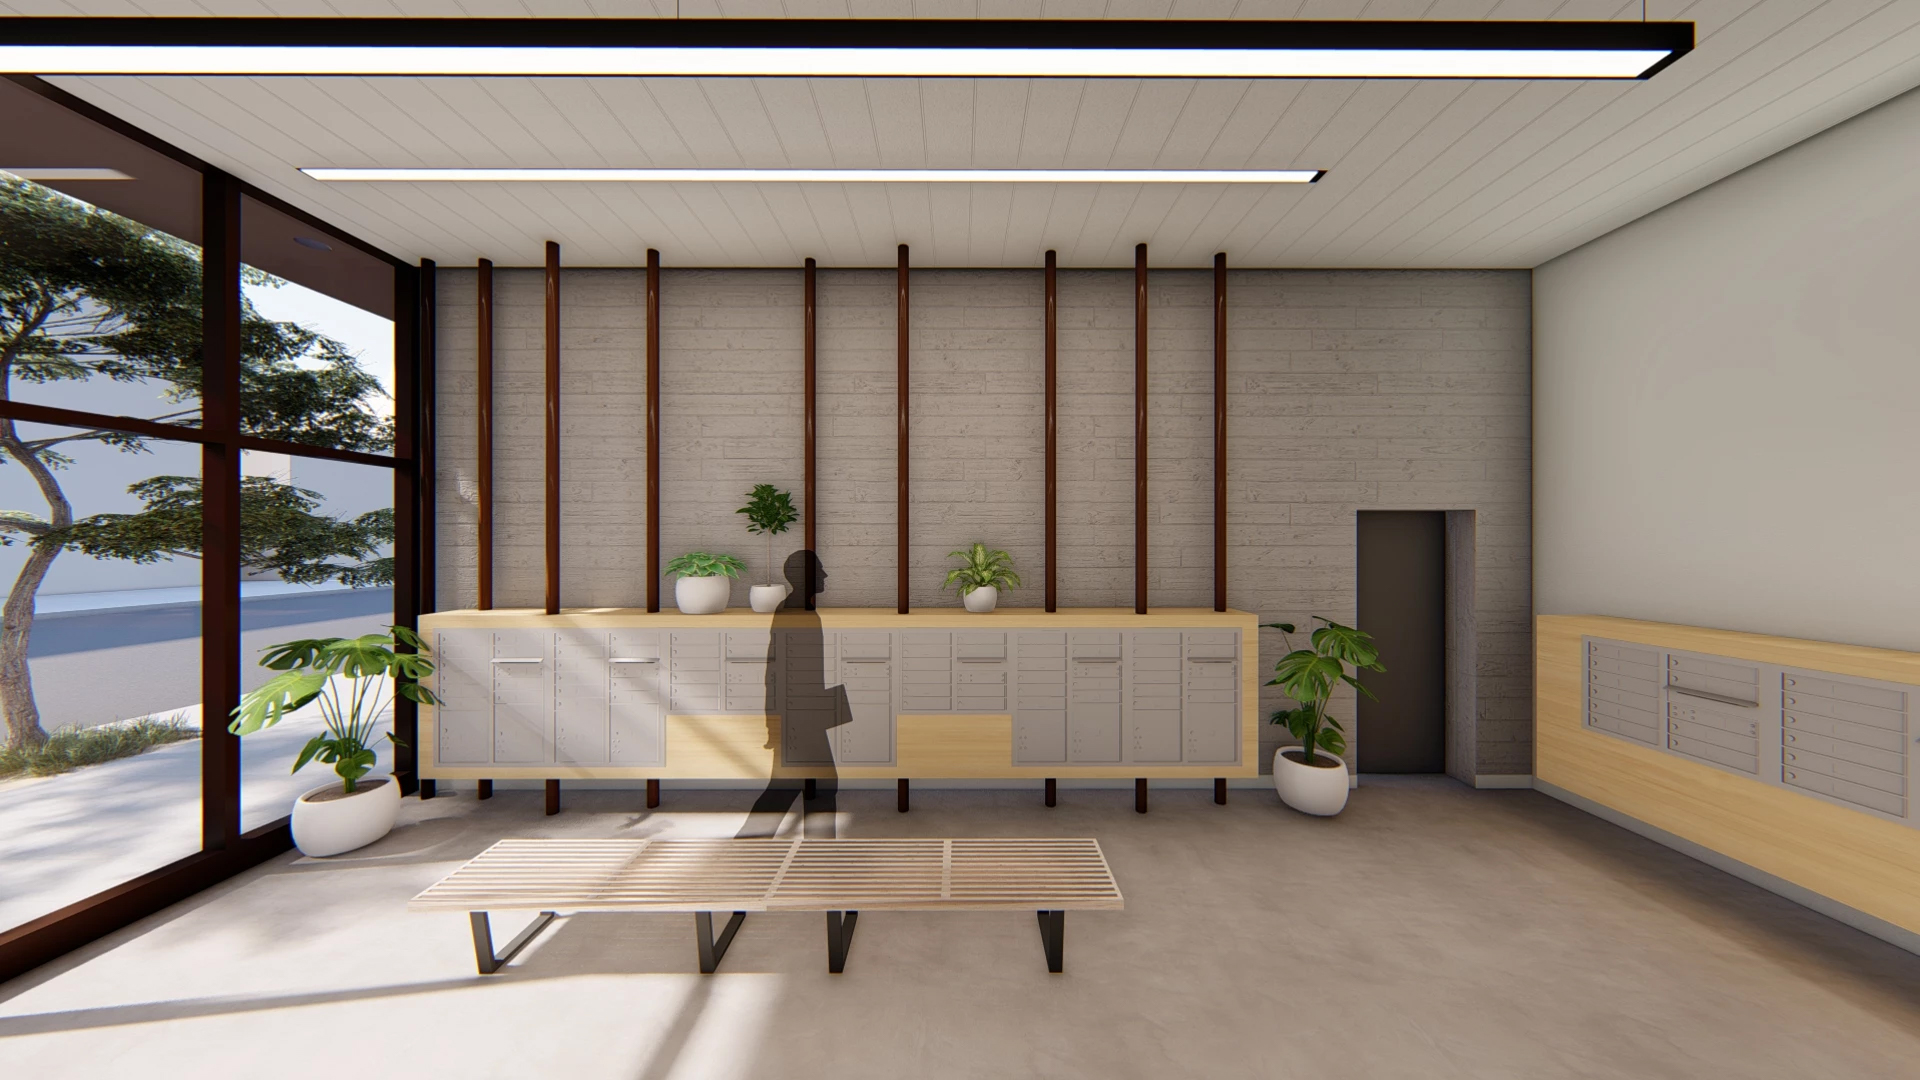 1888 Martin Luther King Jr Way lobby interior, rendering by Baran Studio Architecture